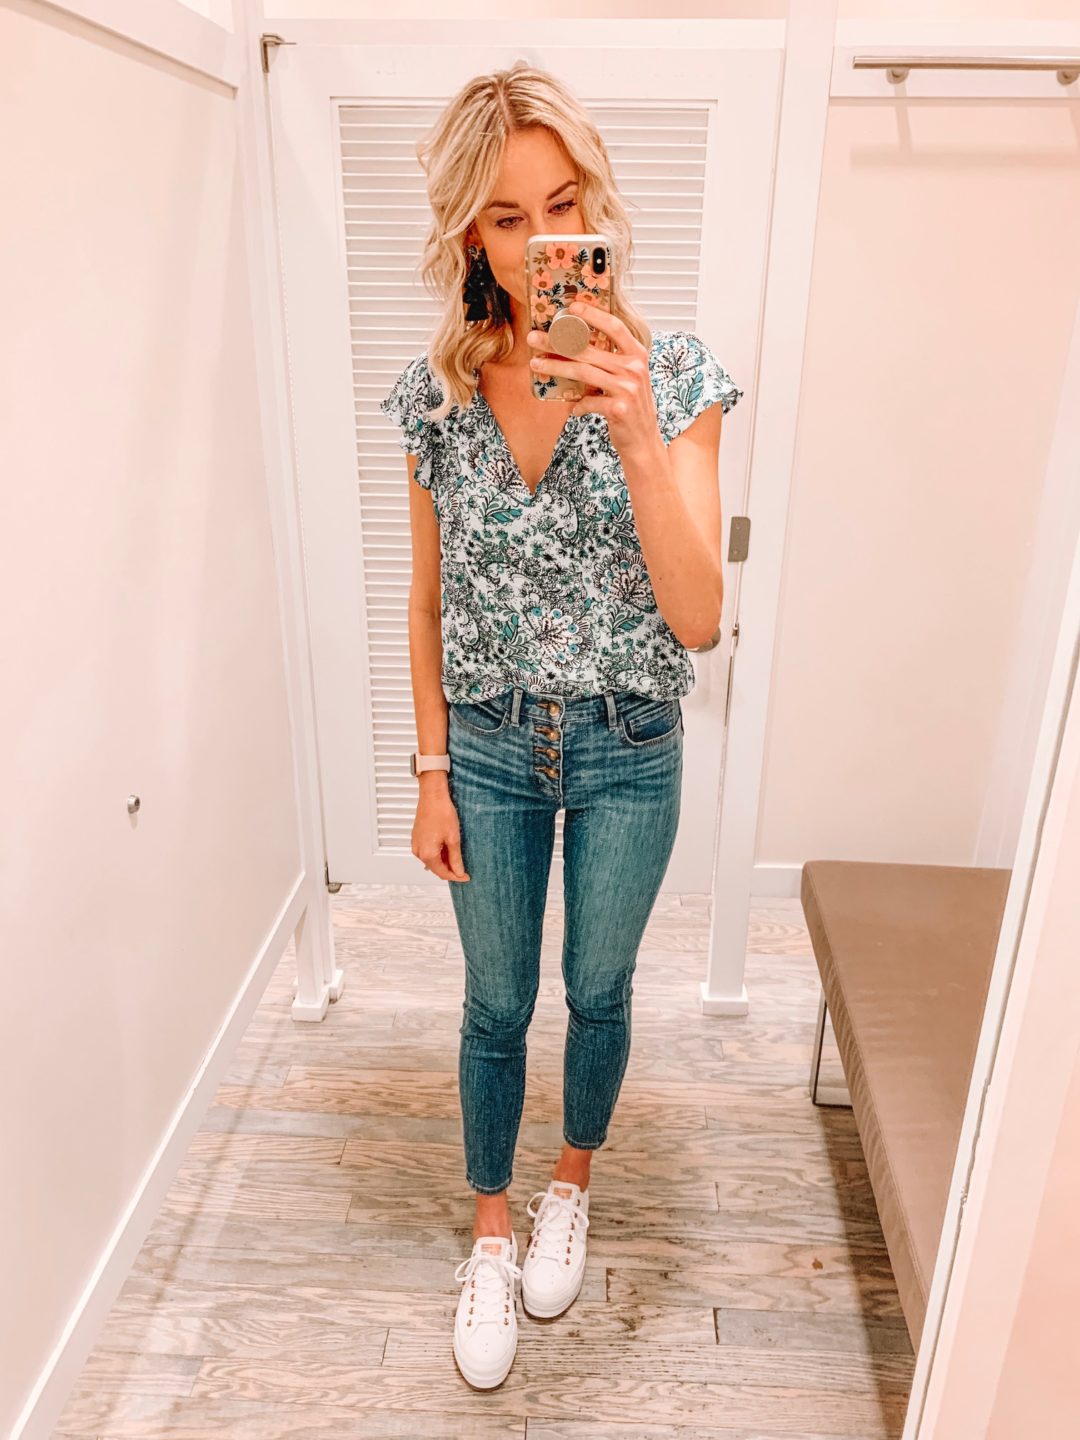 $10 Floral Romper That Fits a Tall Girl - Straight A Style